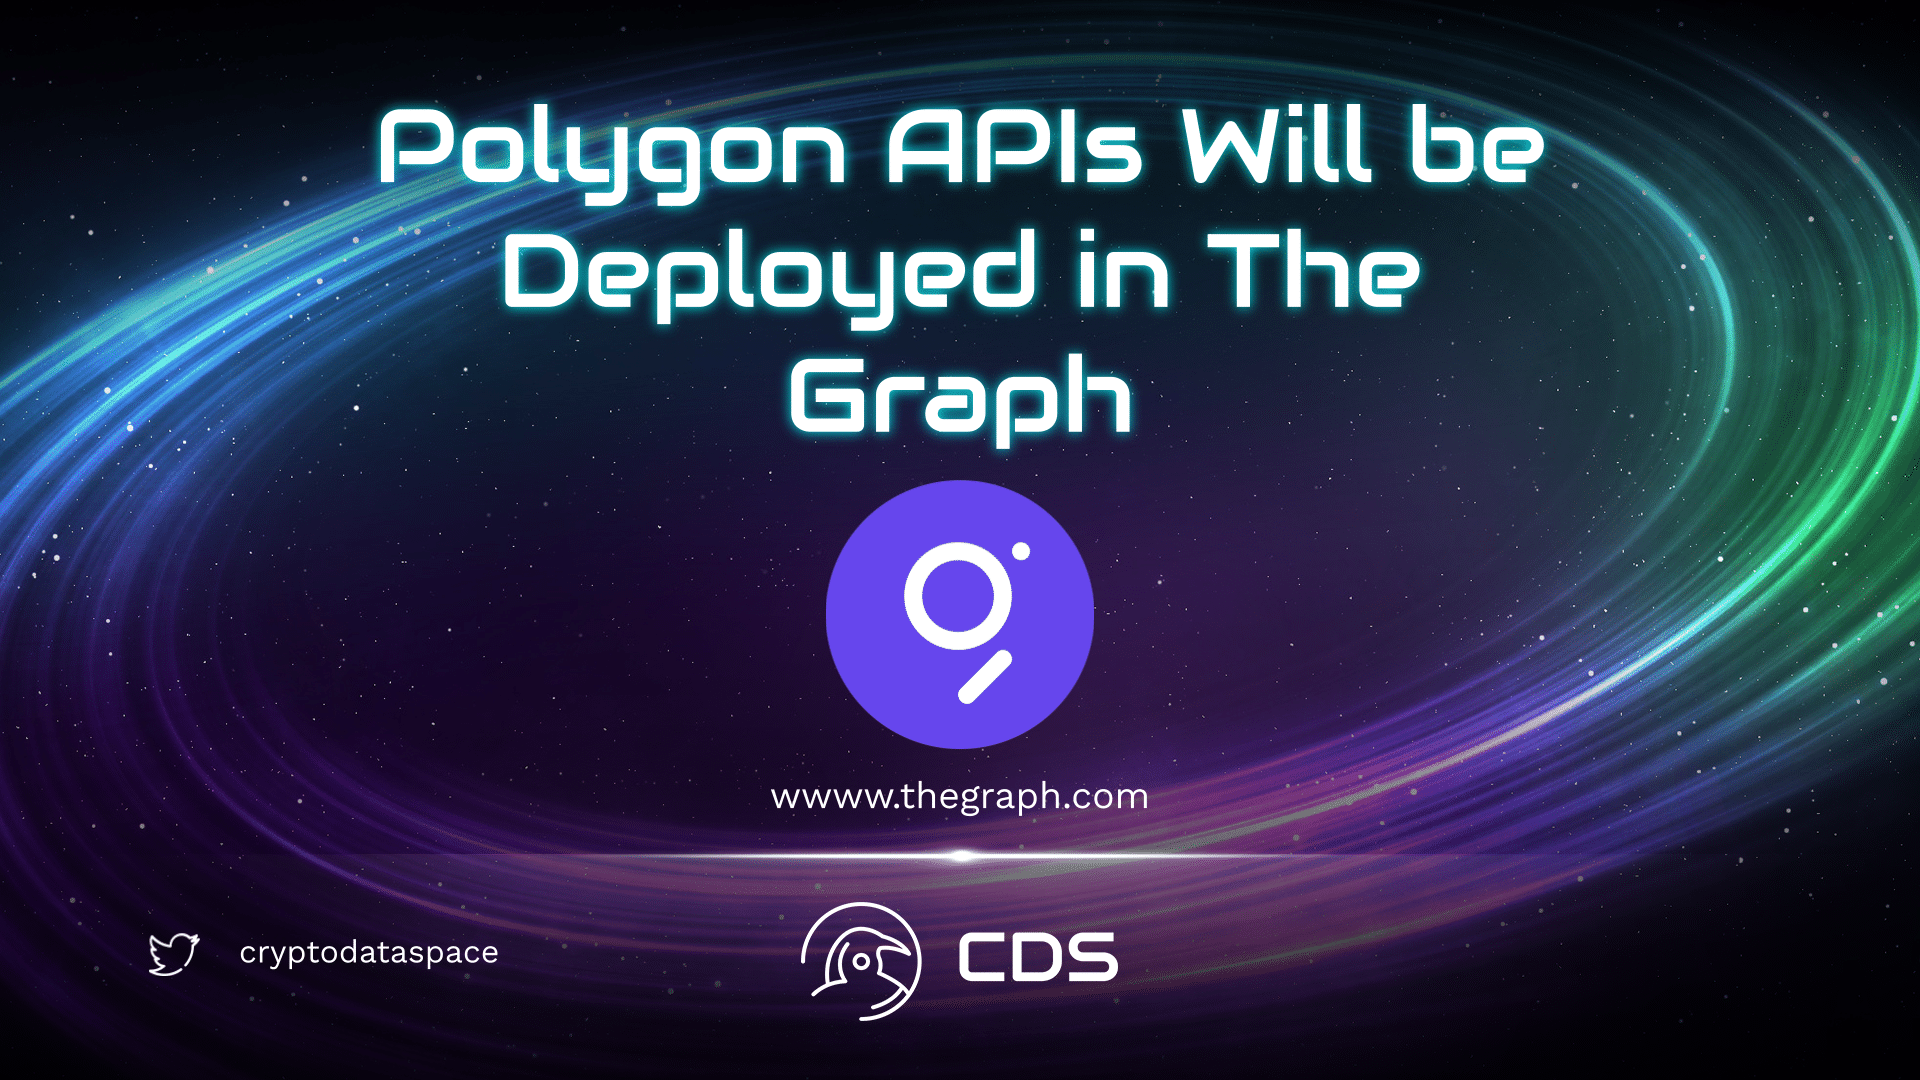 Polygon APIs Will be Deployed in The Graph